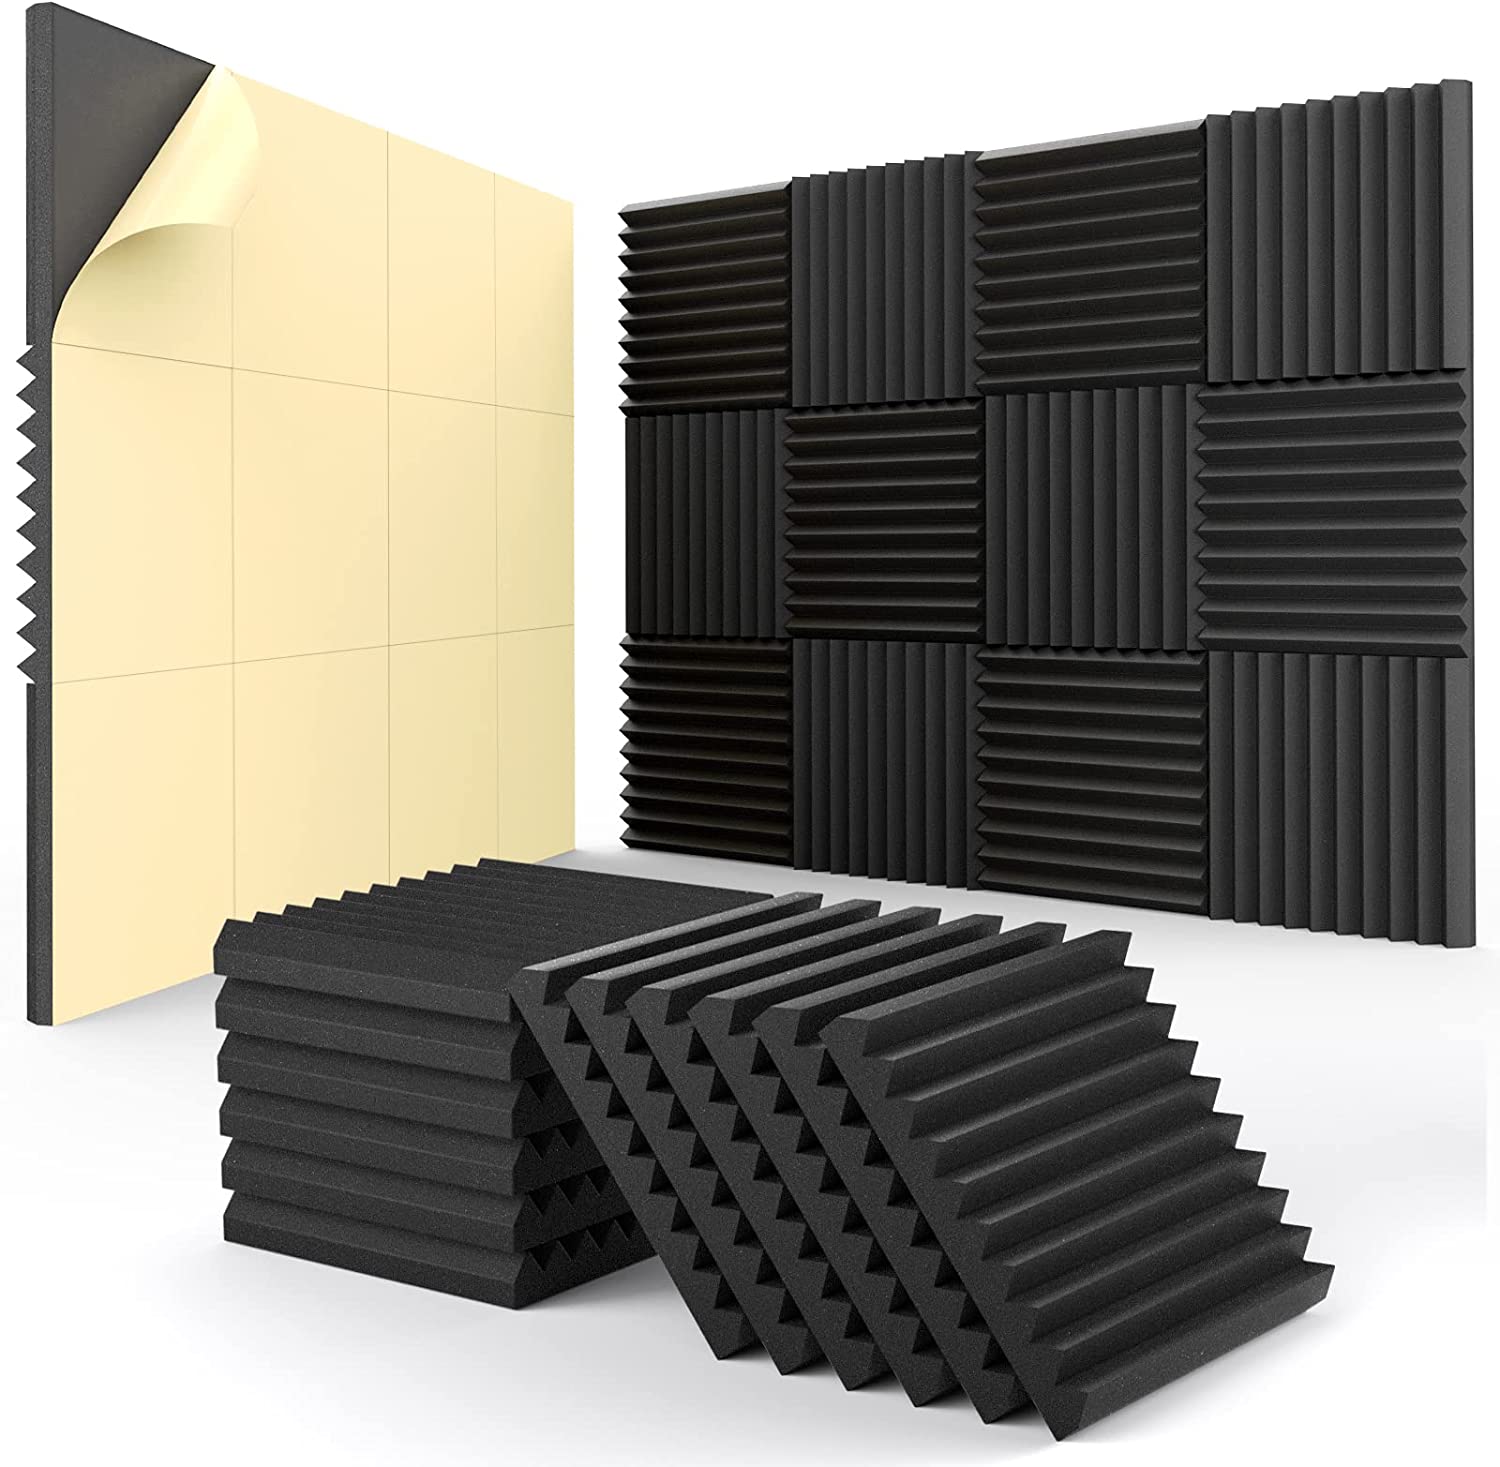 Lebenforce Self-adhesive Acoustic Panels Tiles 12 Pack, 12 X 12 X 0.4  Polyester Sound Proof Padding, High Density Soundproof Wall Panels, Sound  Absorbing panel for Home & Offices (Gray) : : Musical